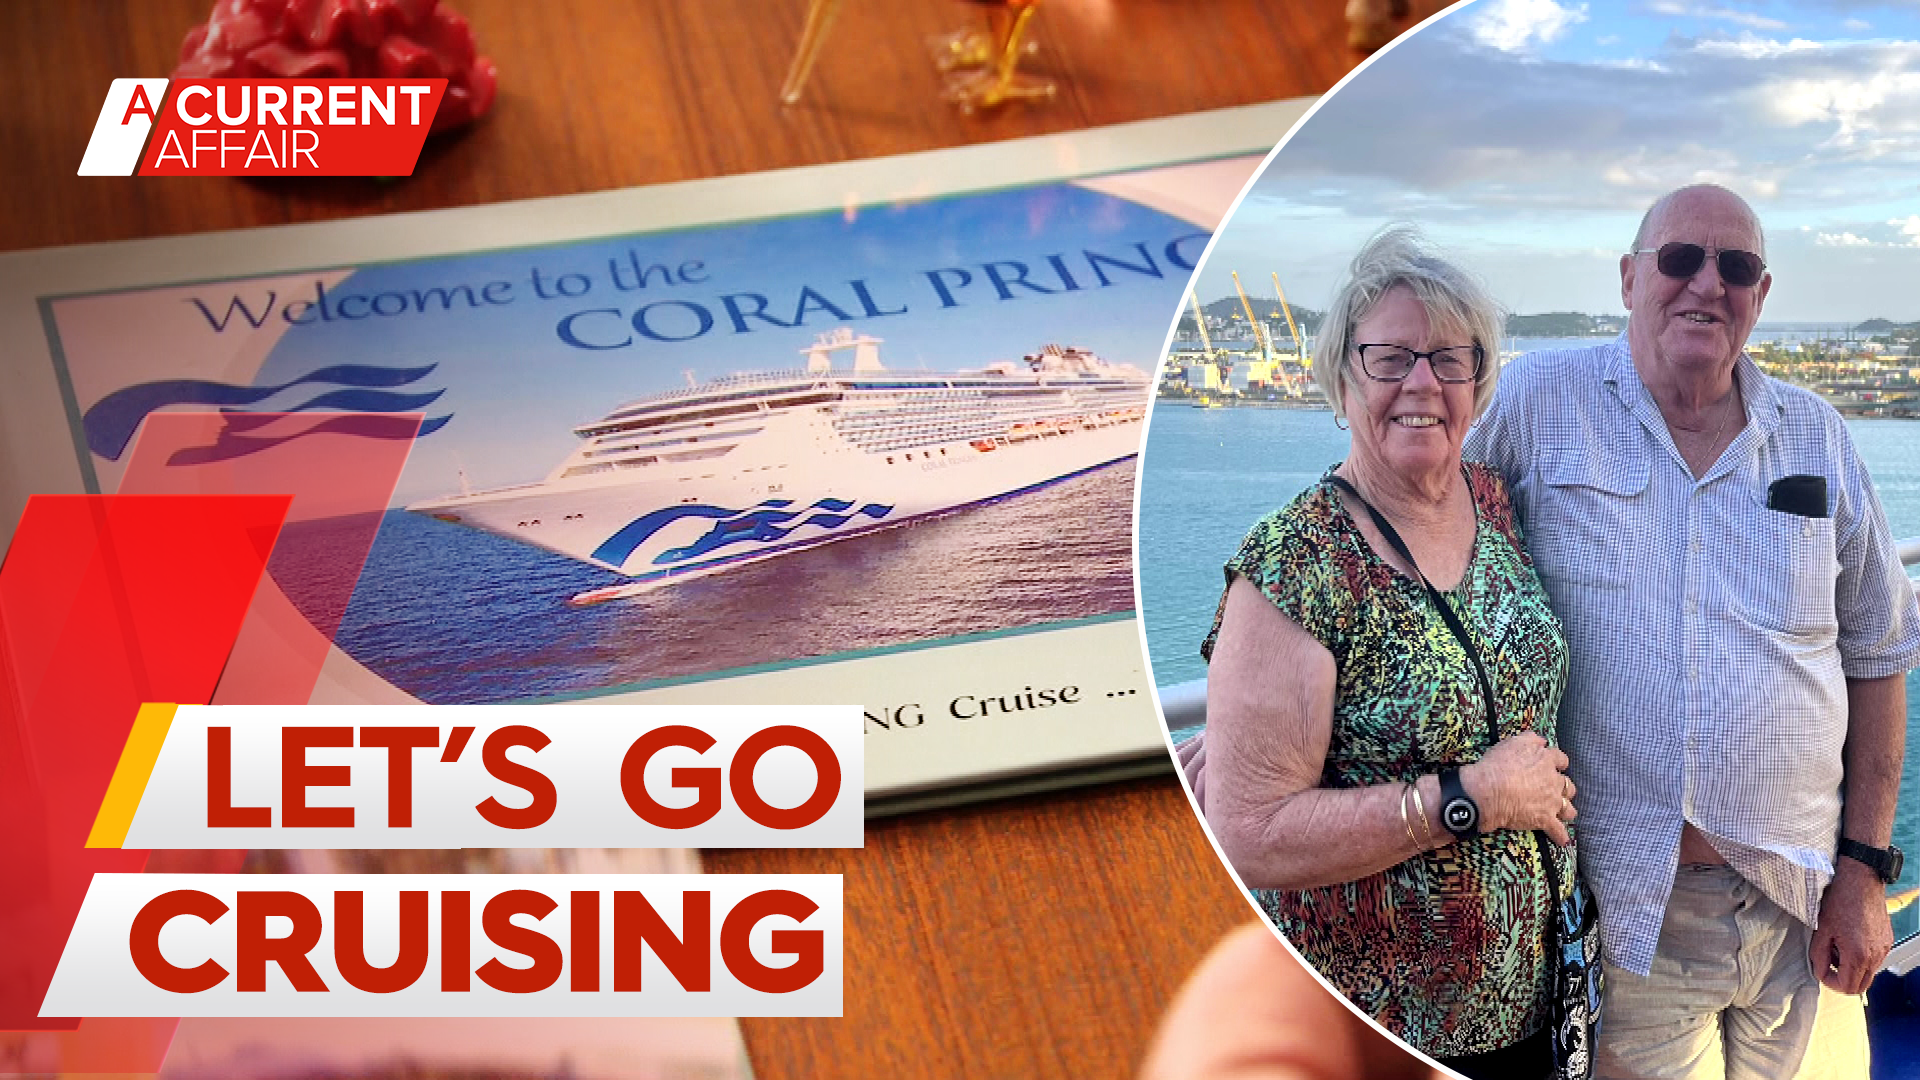 Cruise bookings made easier thanks to dedicated new store